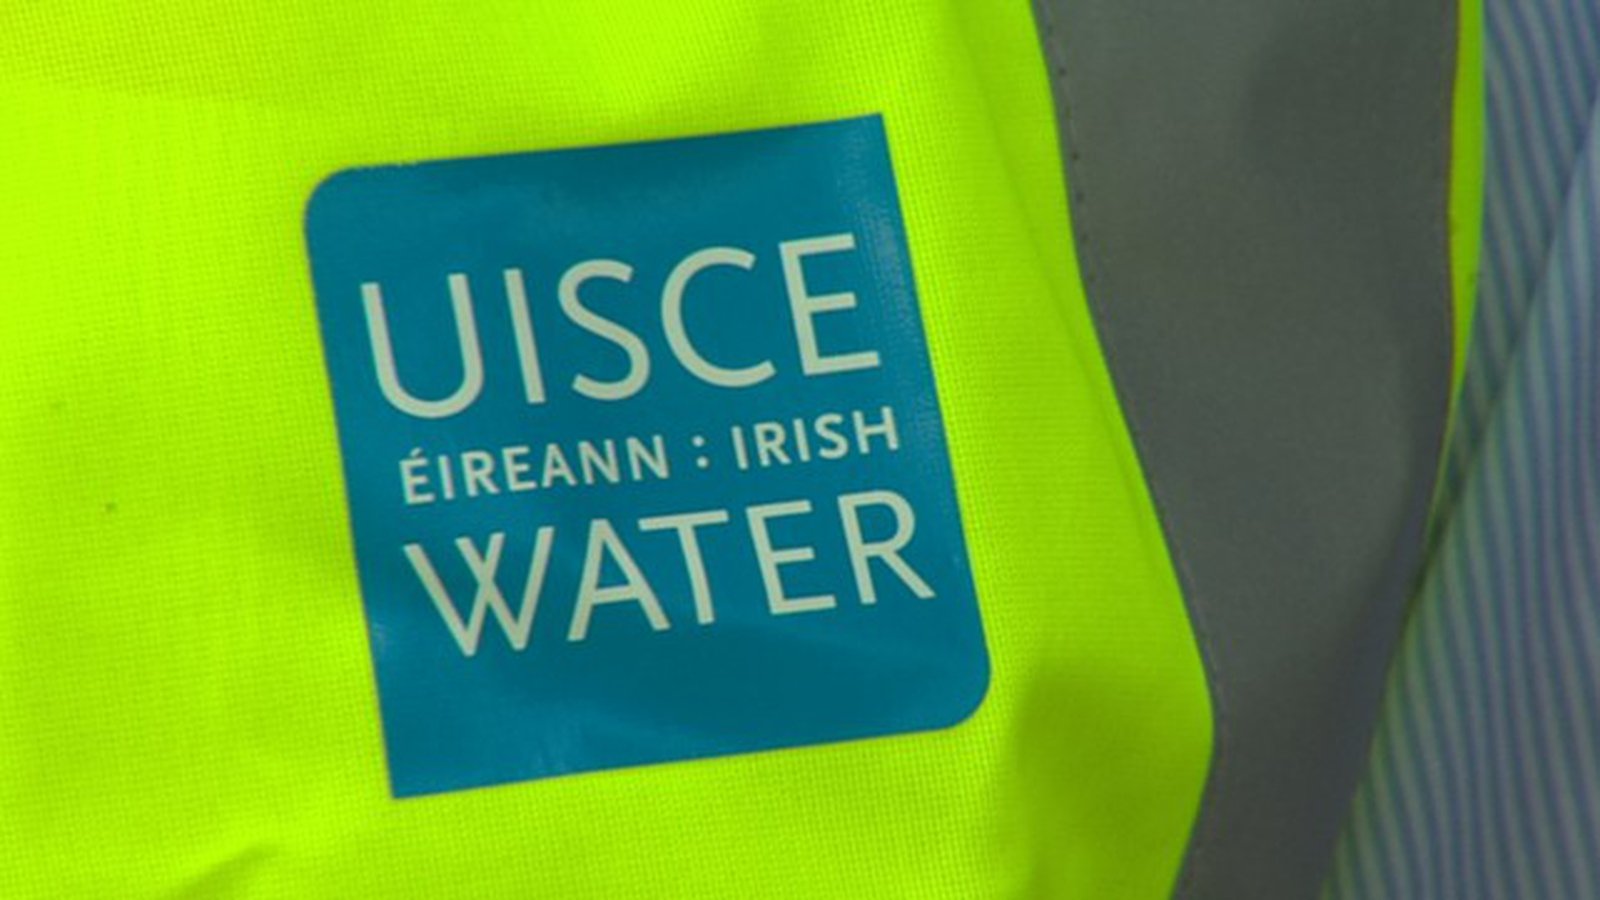 176 staff at Irish Water earning in excess of €100k